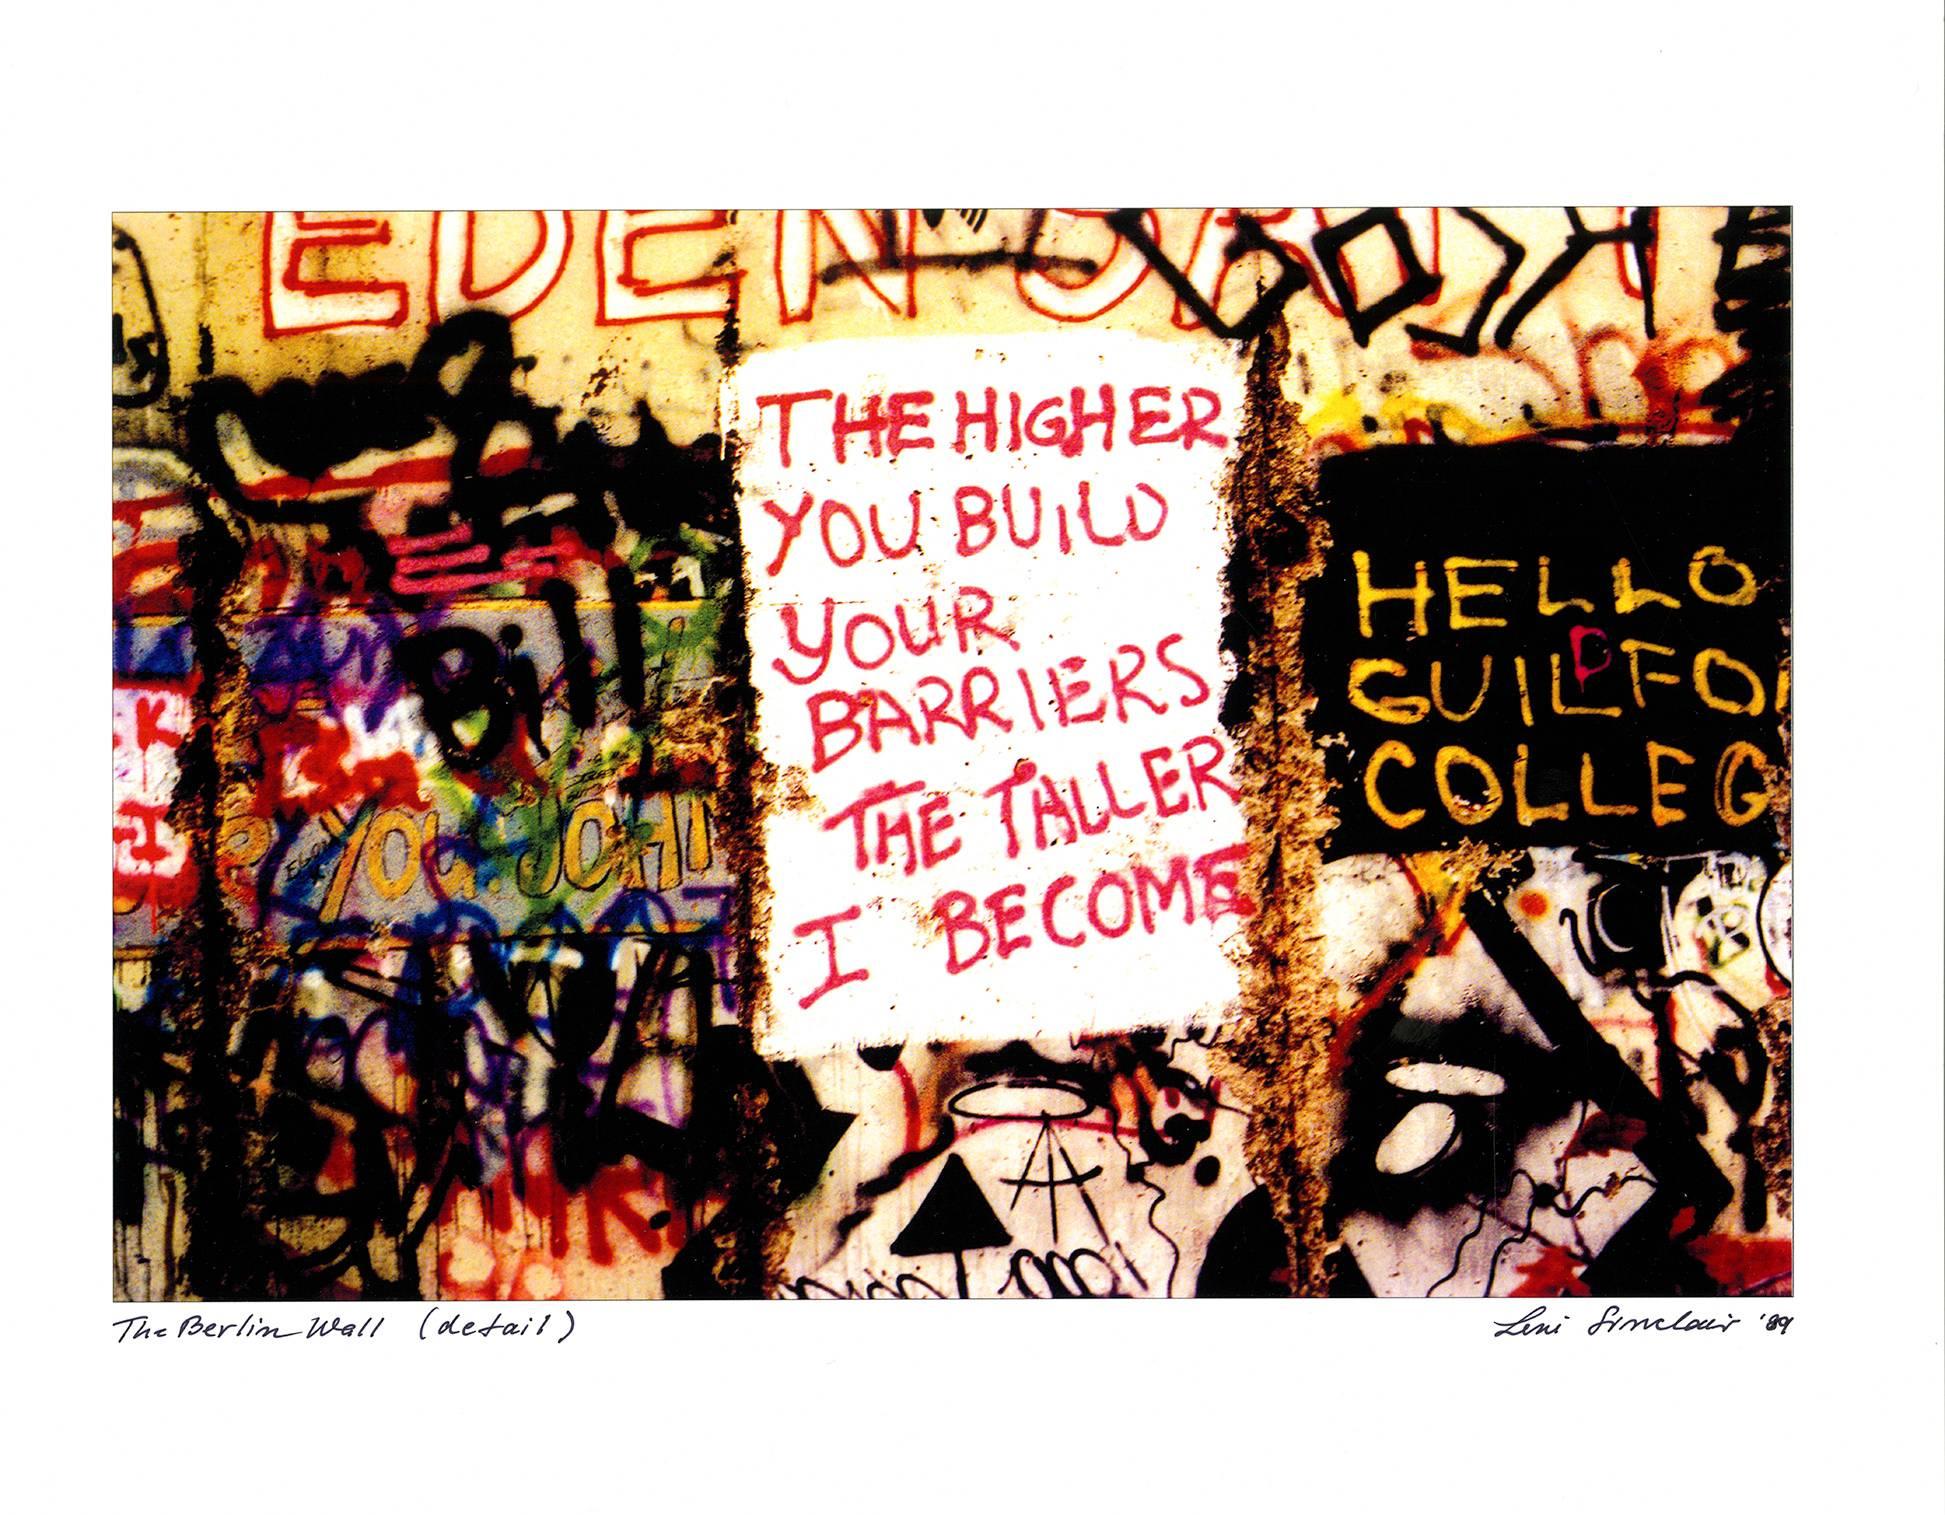 Berlin Wall Photograph 1989 (street photography)  - Beige Color Photograph by Leni Sinclair